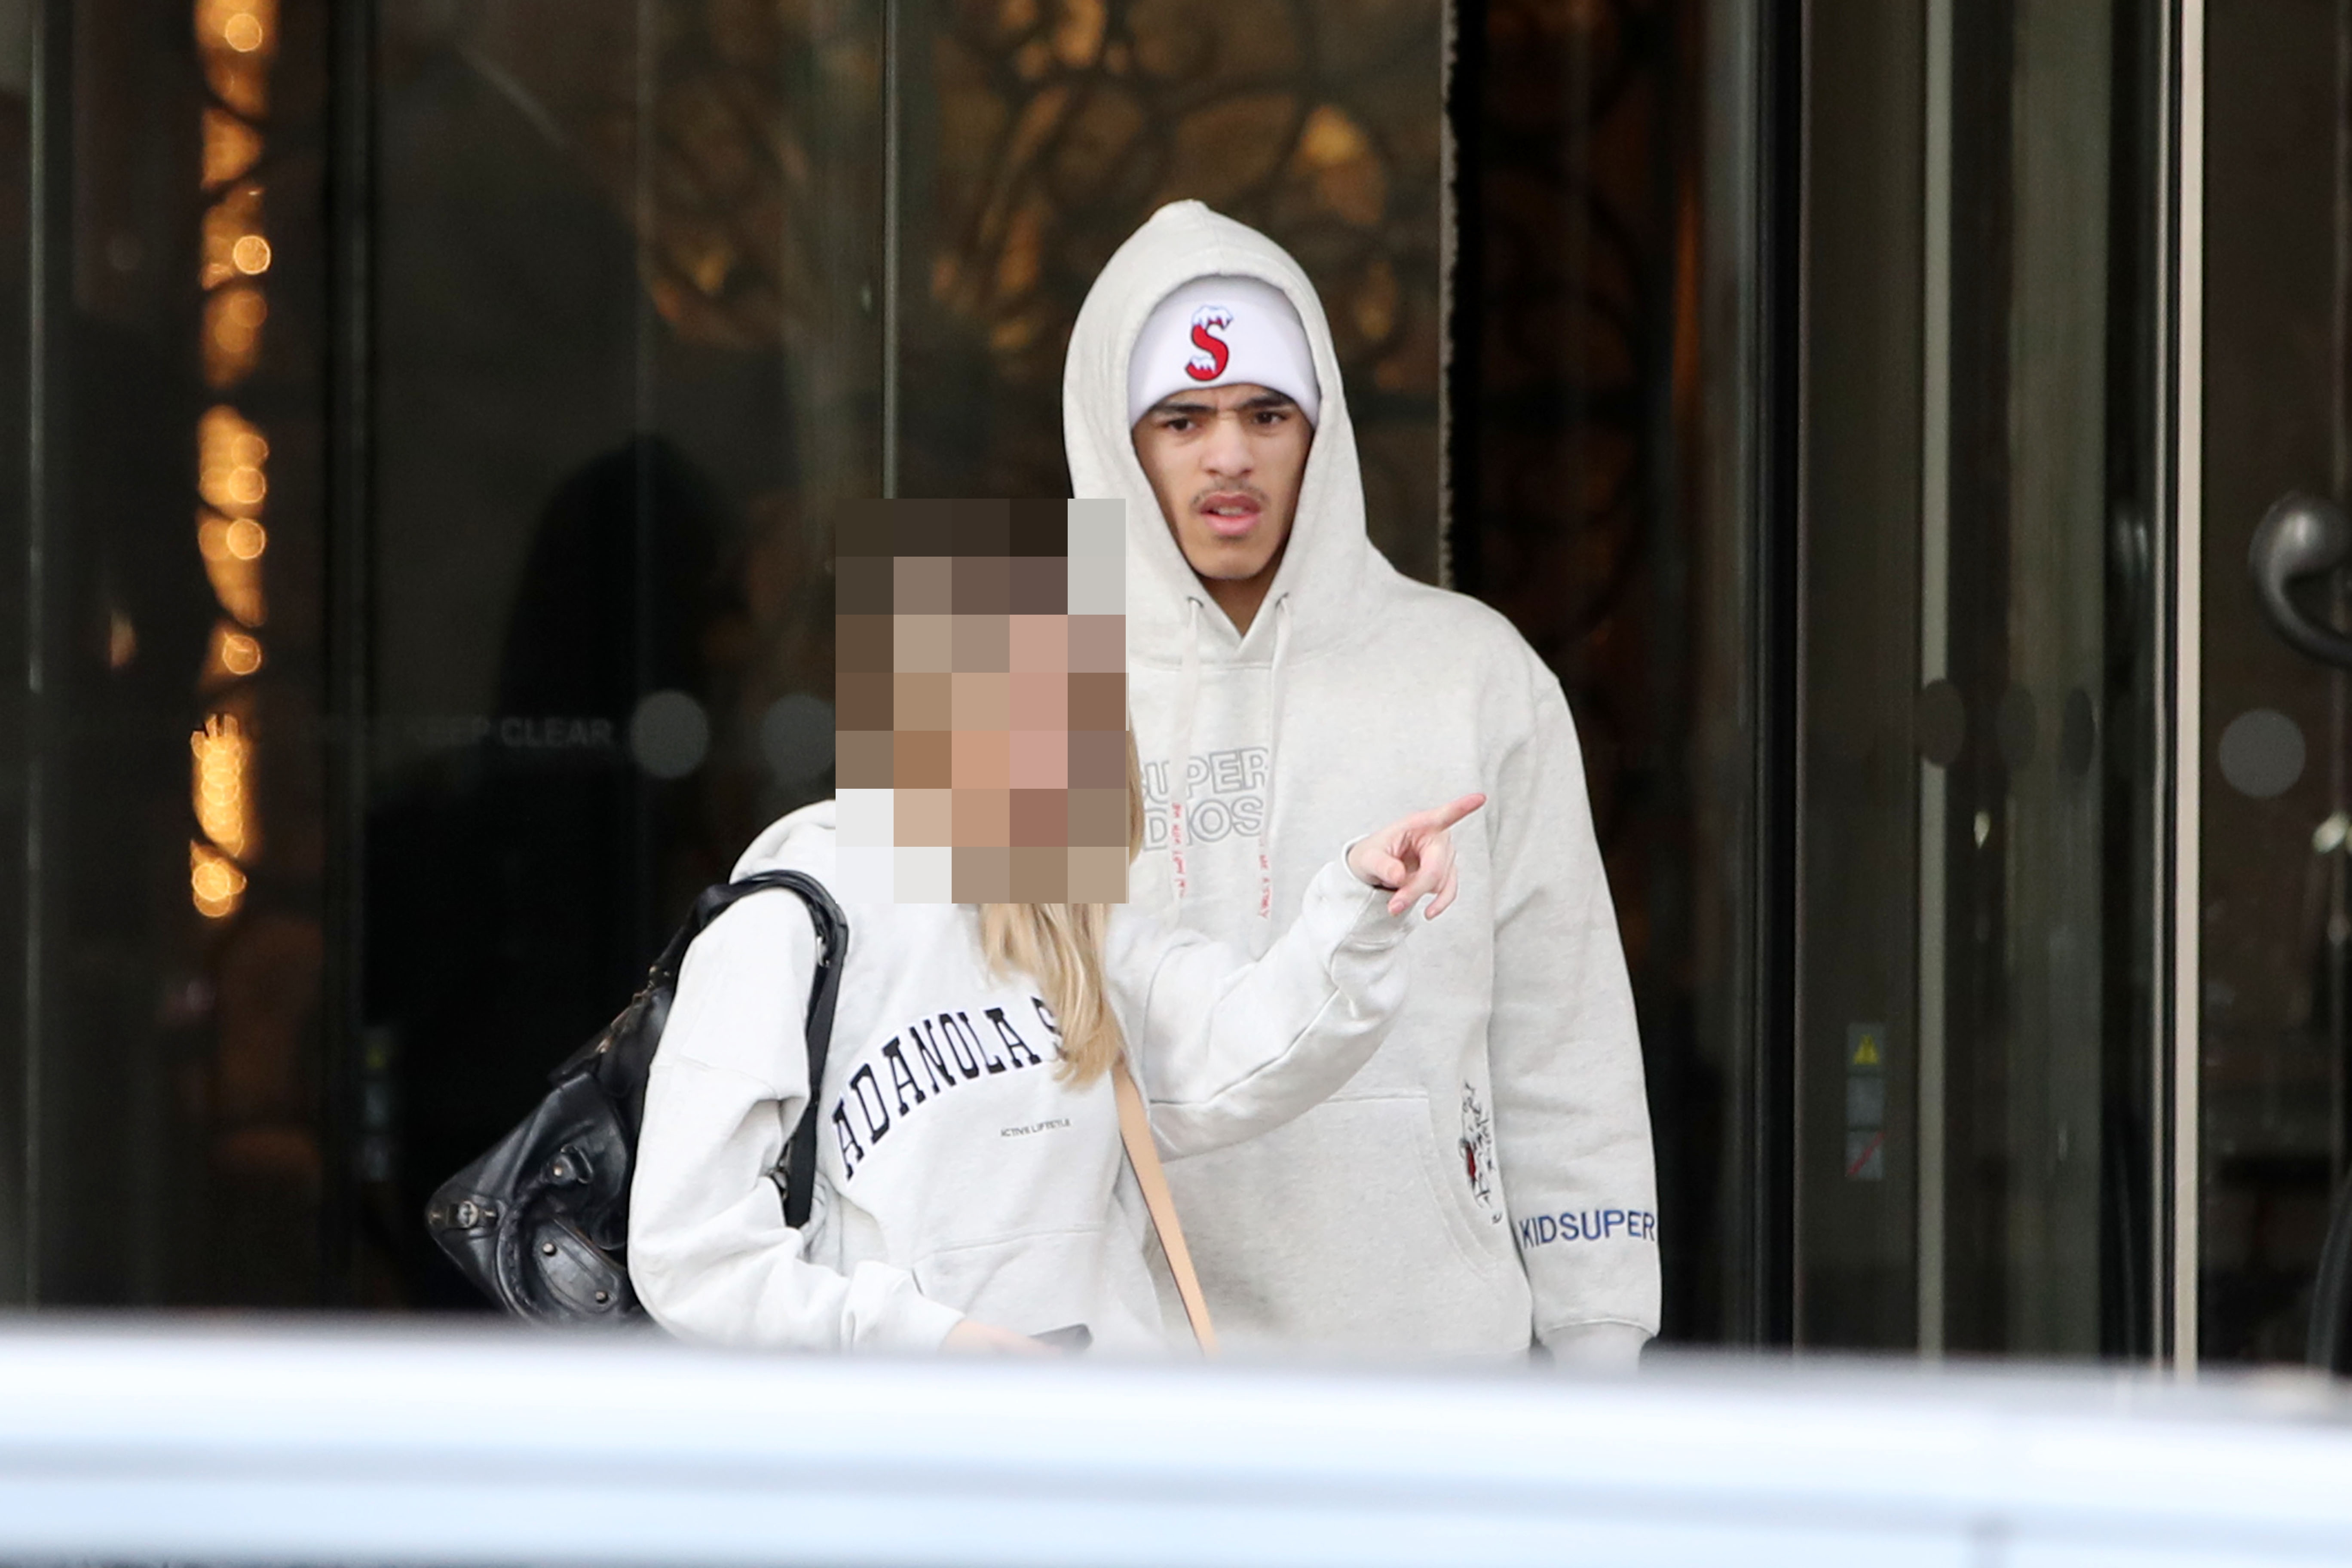 The couple were pictured at the five-star Langham Hotel, central London